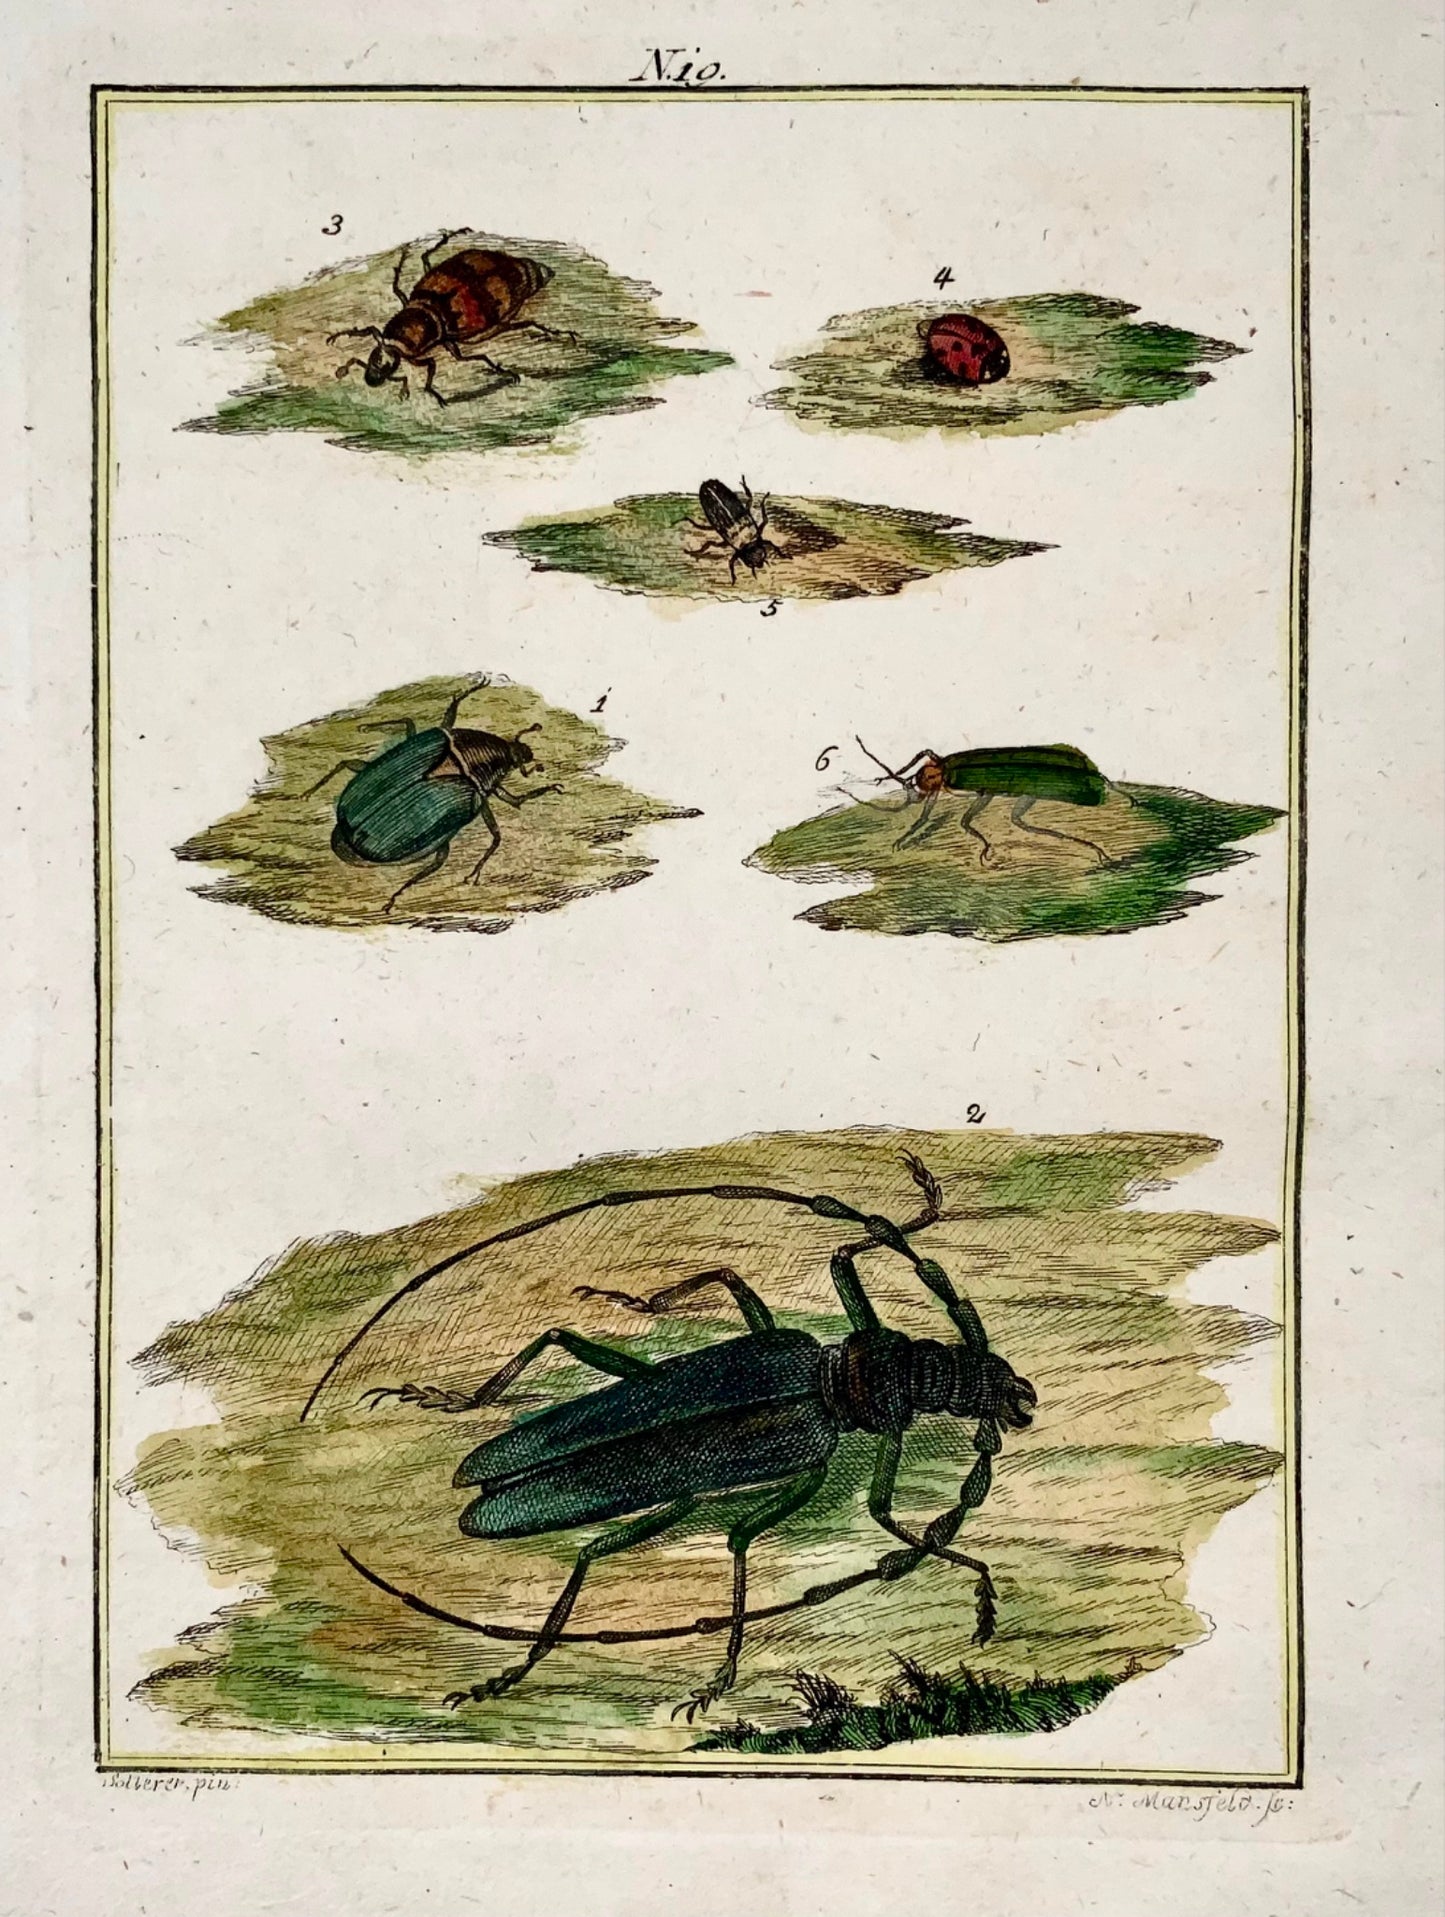 1790 Beetles, insects, Joh. Sollerer hand coloured engraving